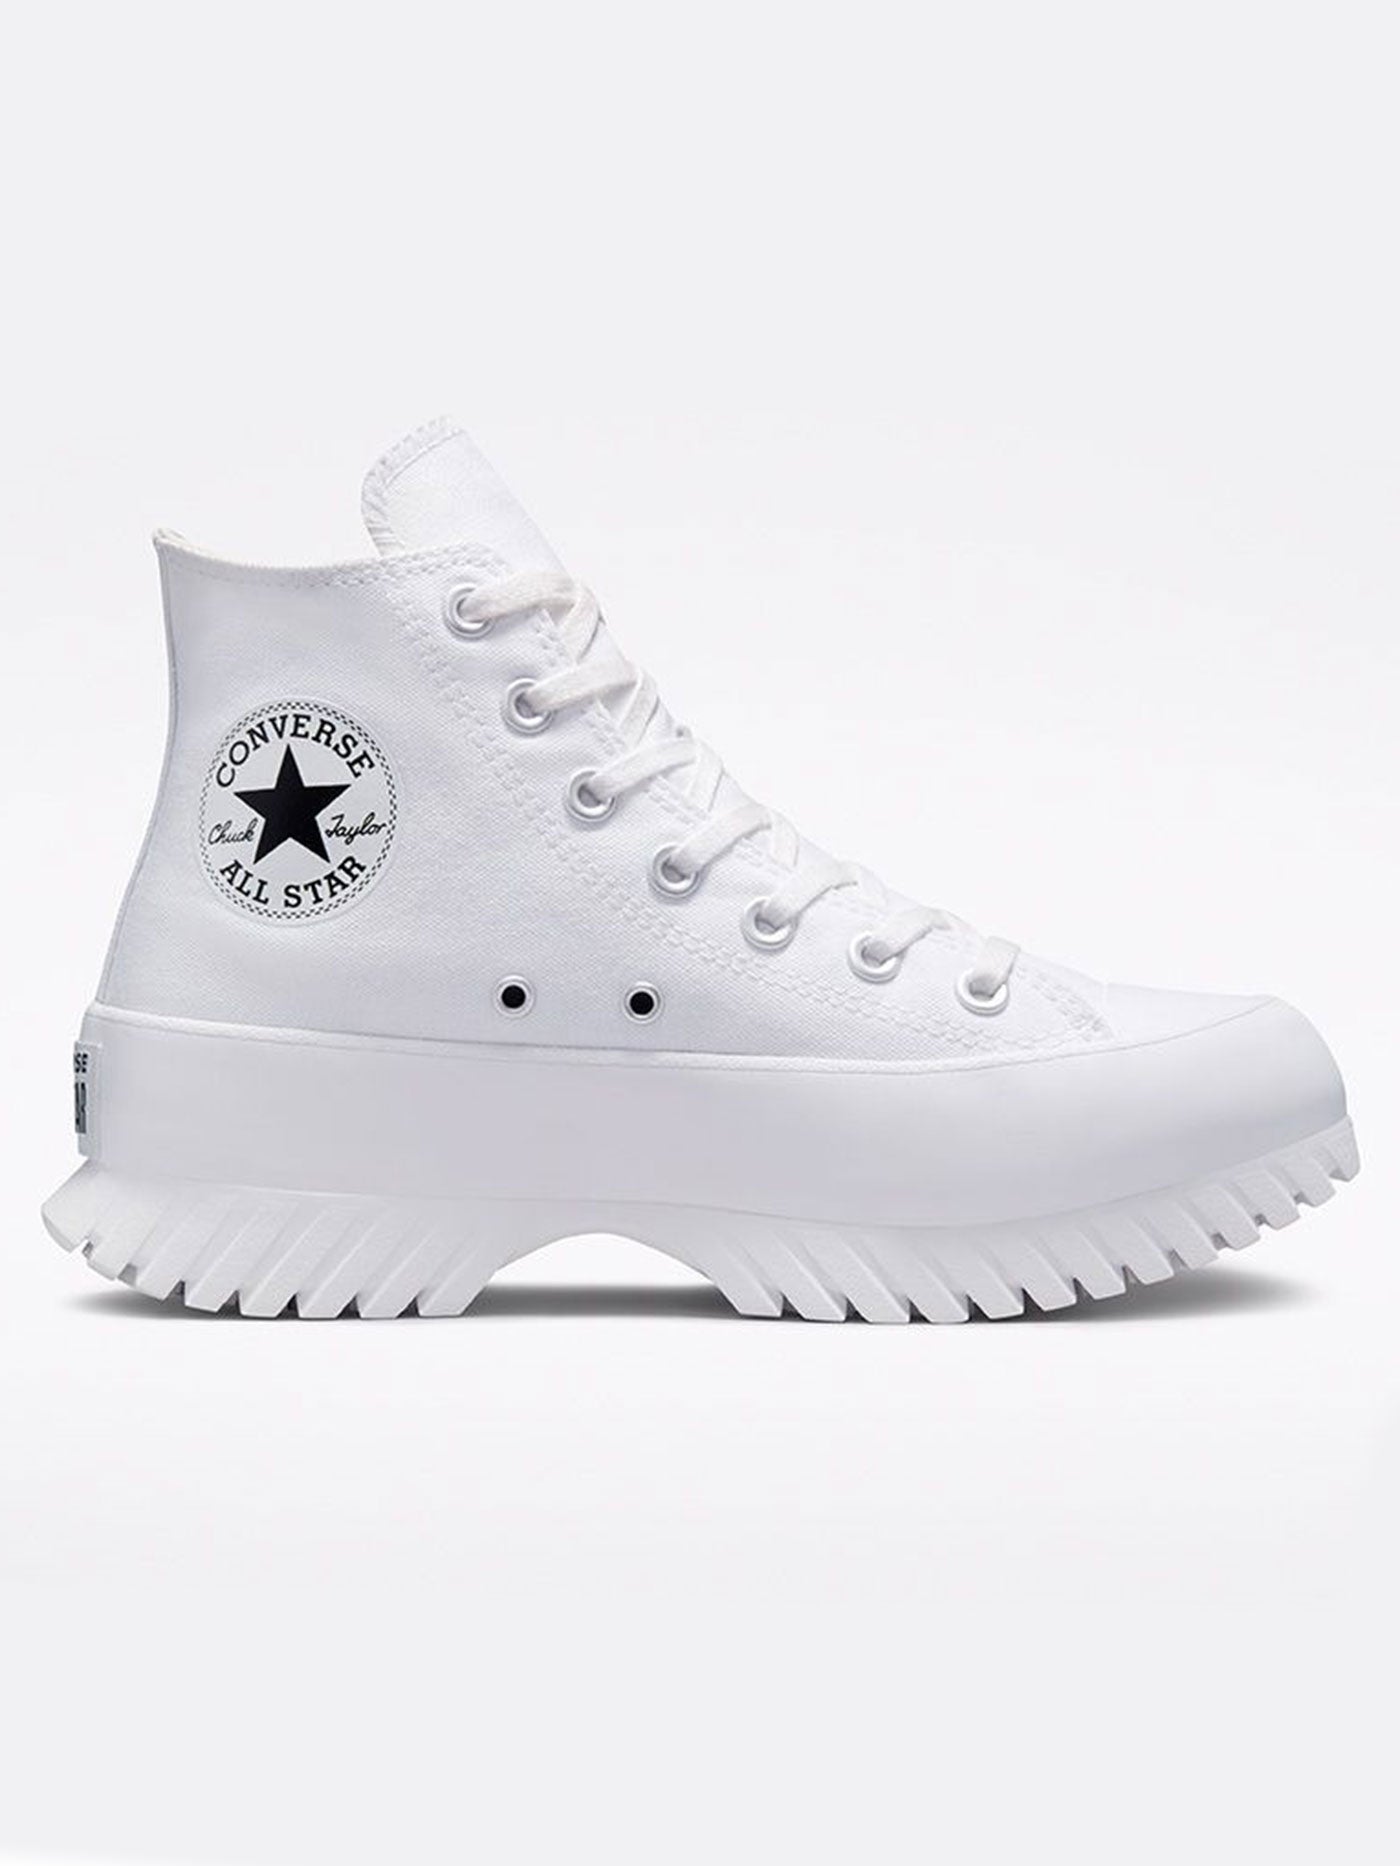 Converse All Star Lugged 2.0 Platform White/Egret/White Shoes